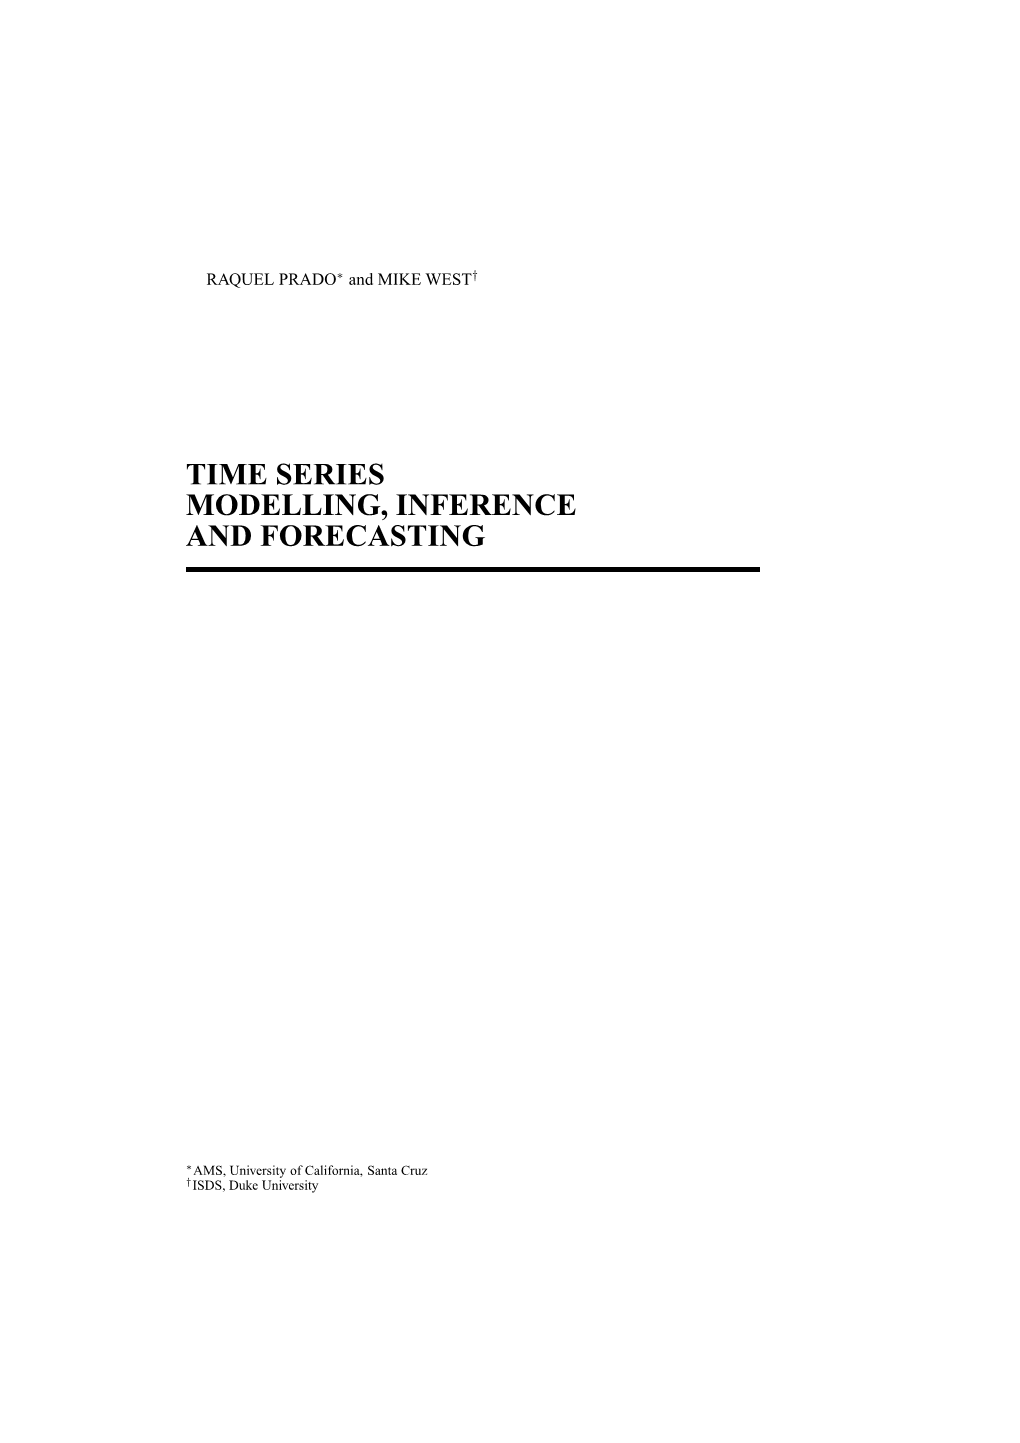 Time Series Modelling, Inference and Forecasting